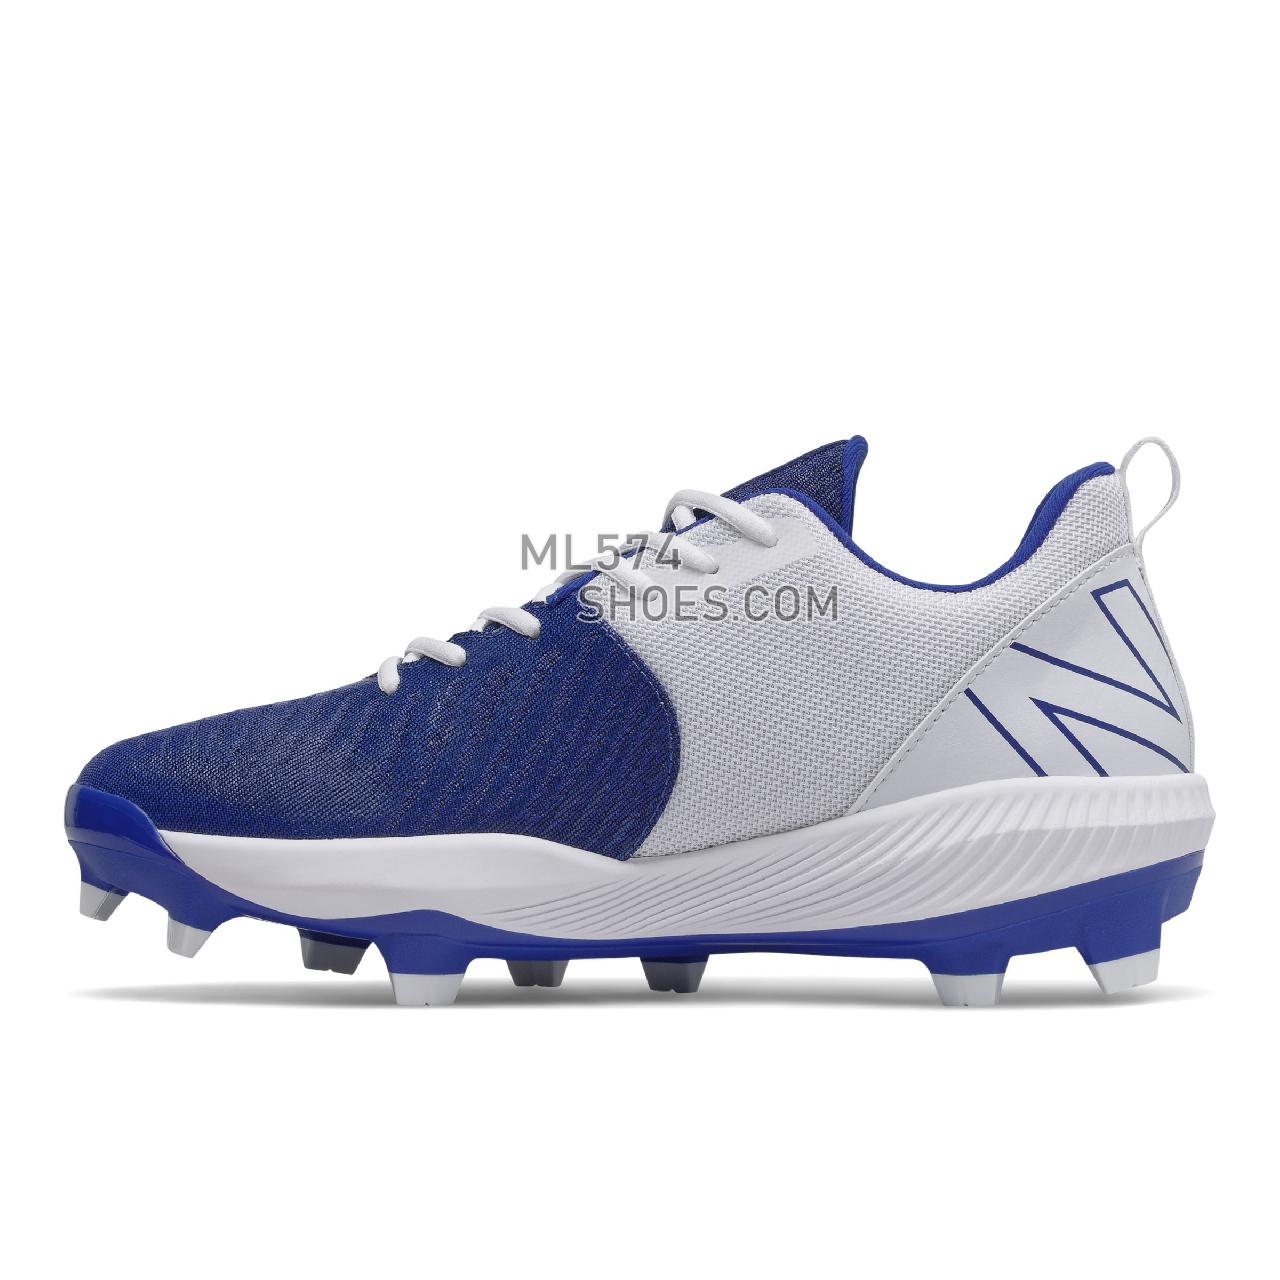 New Balance FuelCell 4040 v6 Molded - Men's Mid-Cut Baseball Cleats - Team Royal with White - PL4040B6